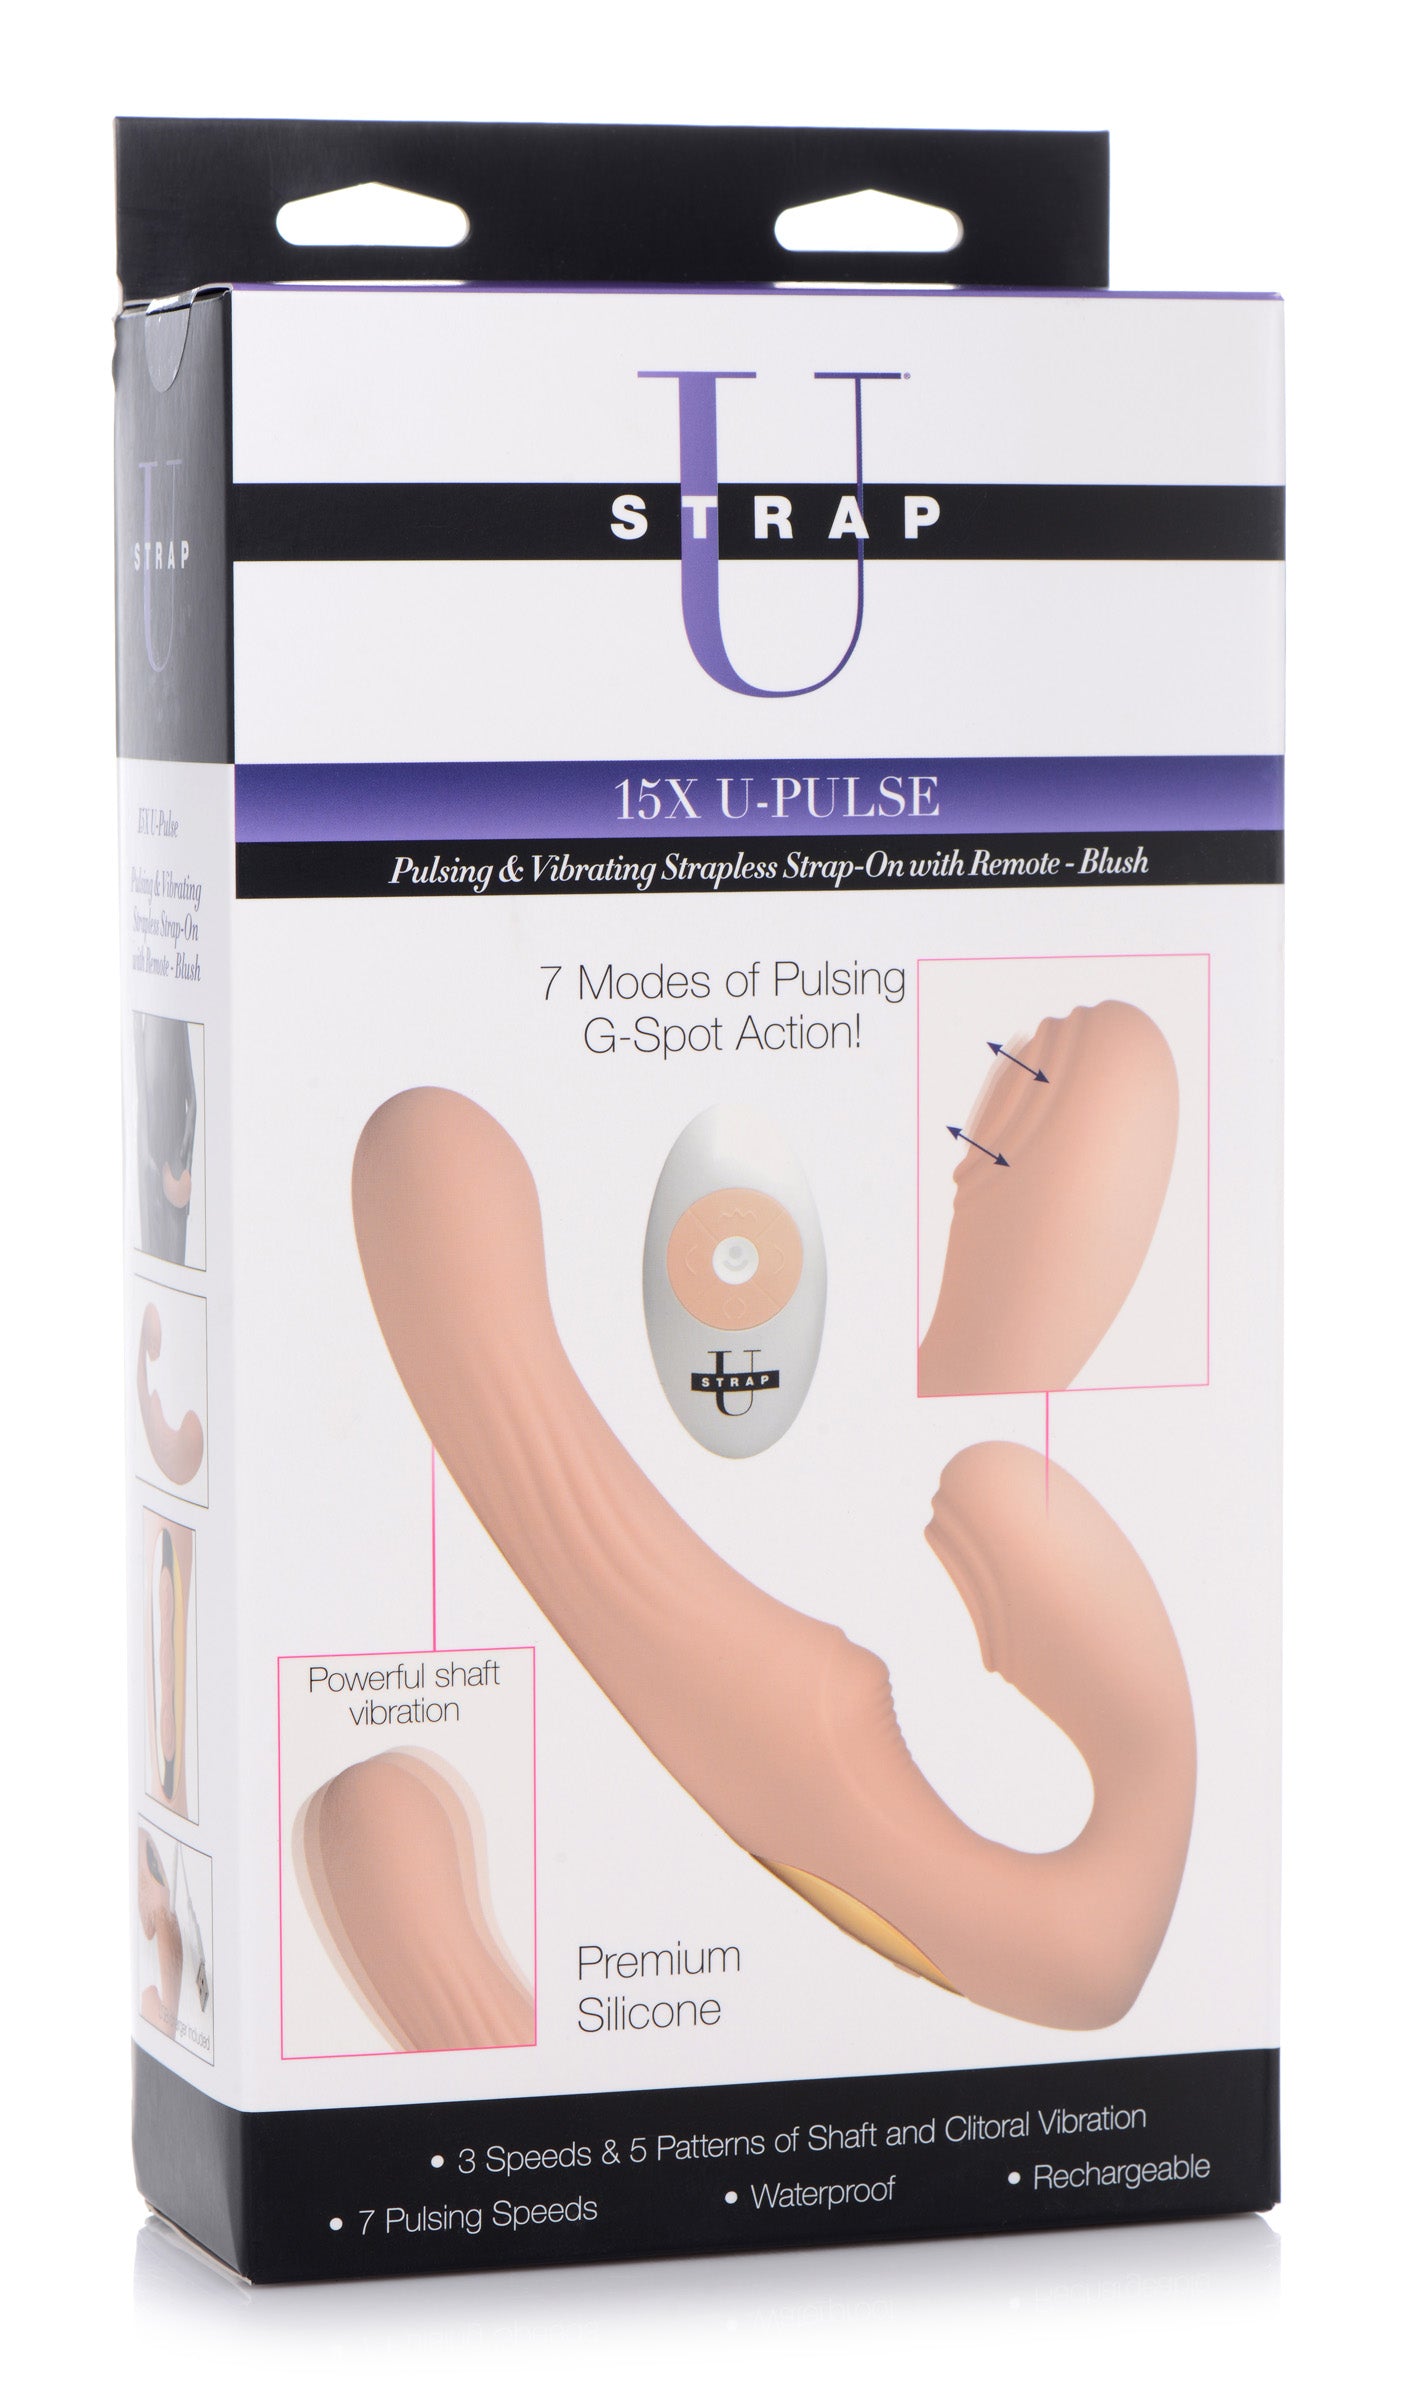 15x U-pulse Silicone Pulsating And Vibrating Strapless Strap-on With Remote - Blush